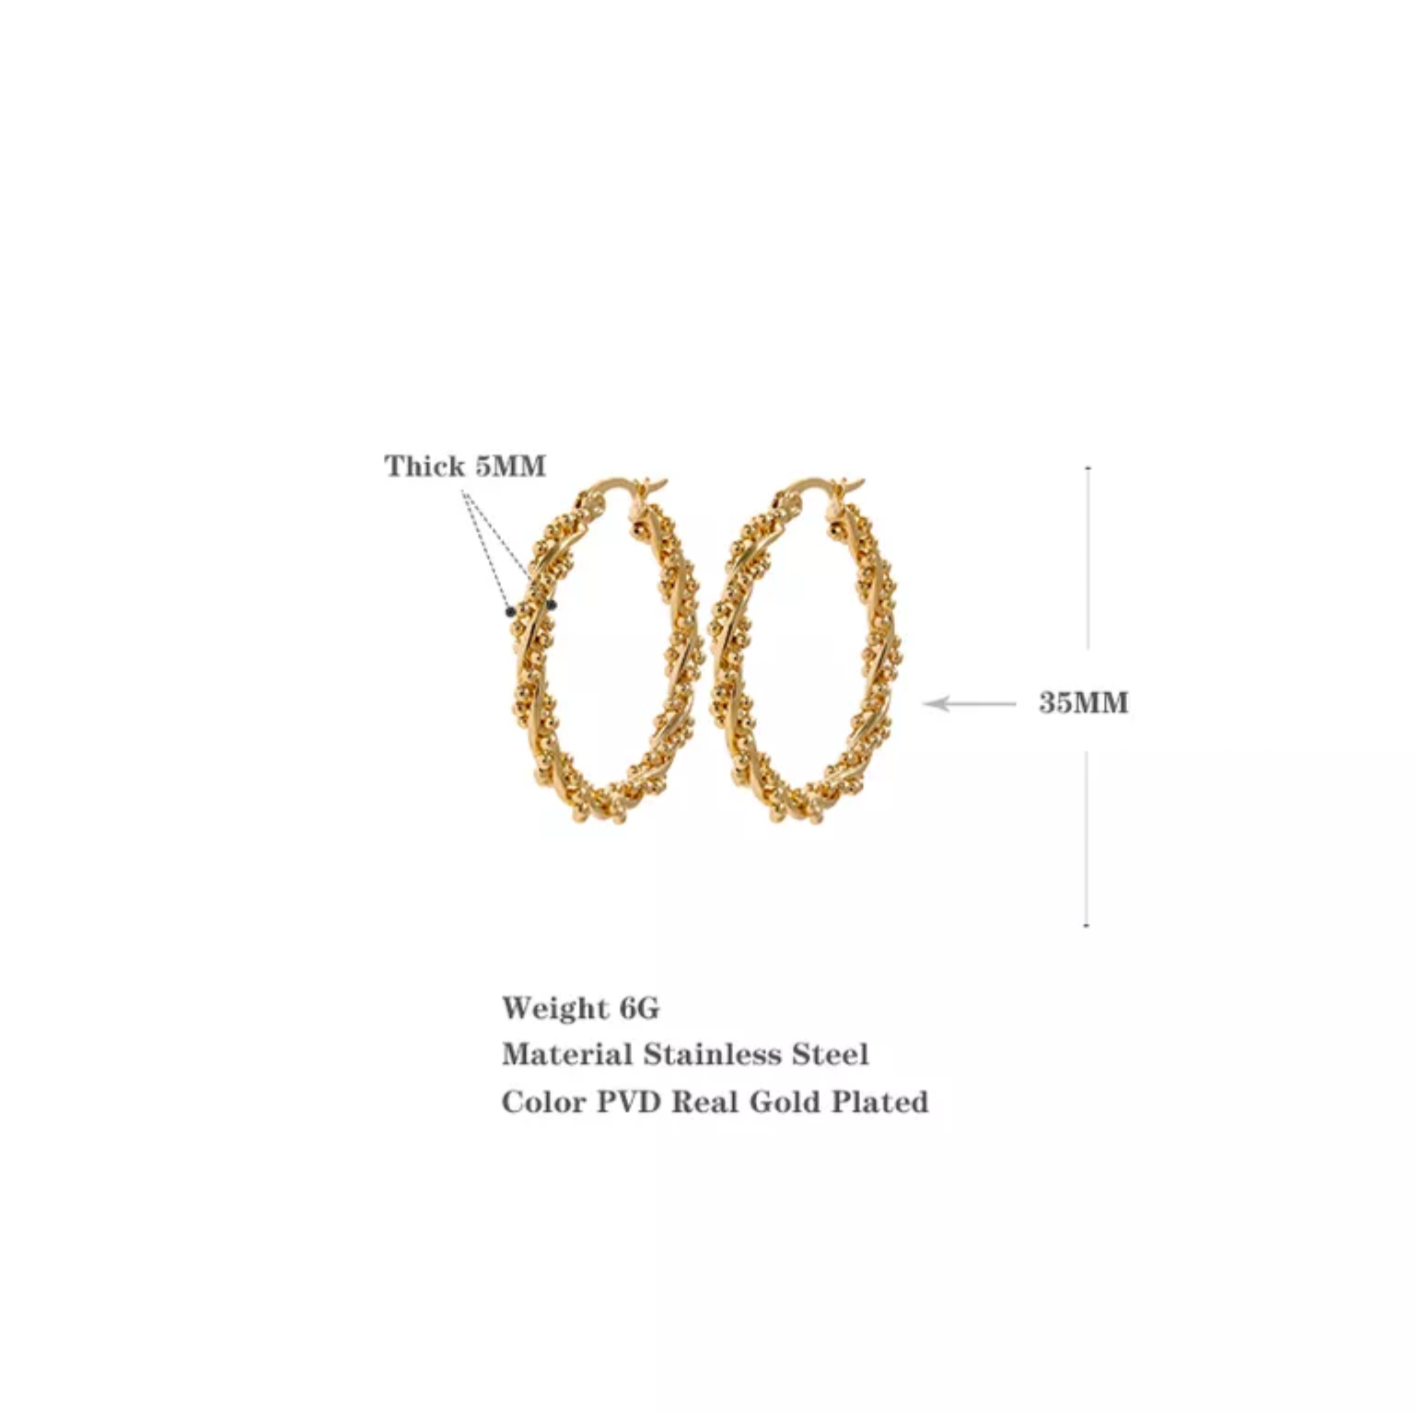 GIA - New Style Twist Beads Hoops Earrings - Golden Collection